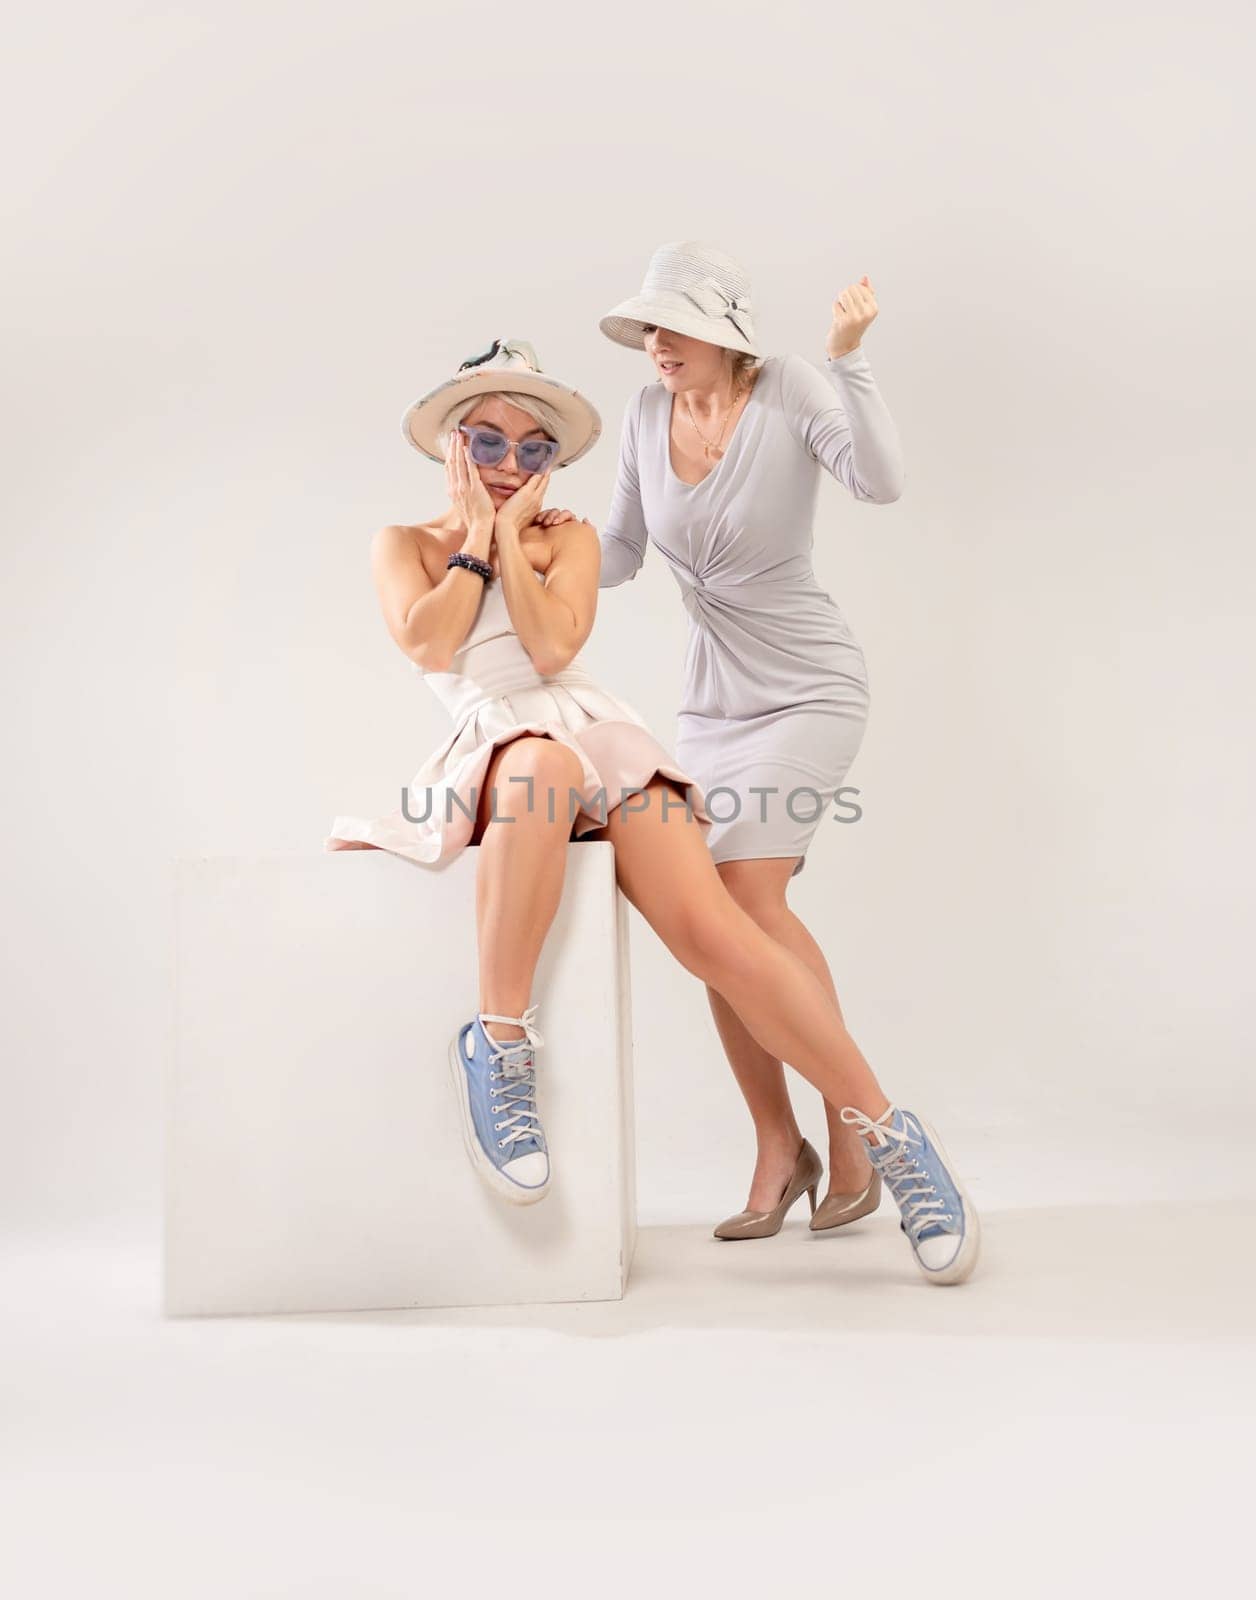 two girls in different styles of clothing playing a conflict or quarrel with each other on a white background, the psychology of human relations, the conflict of the inner child and parent by Rotozey